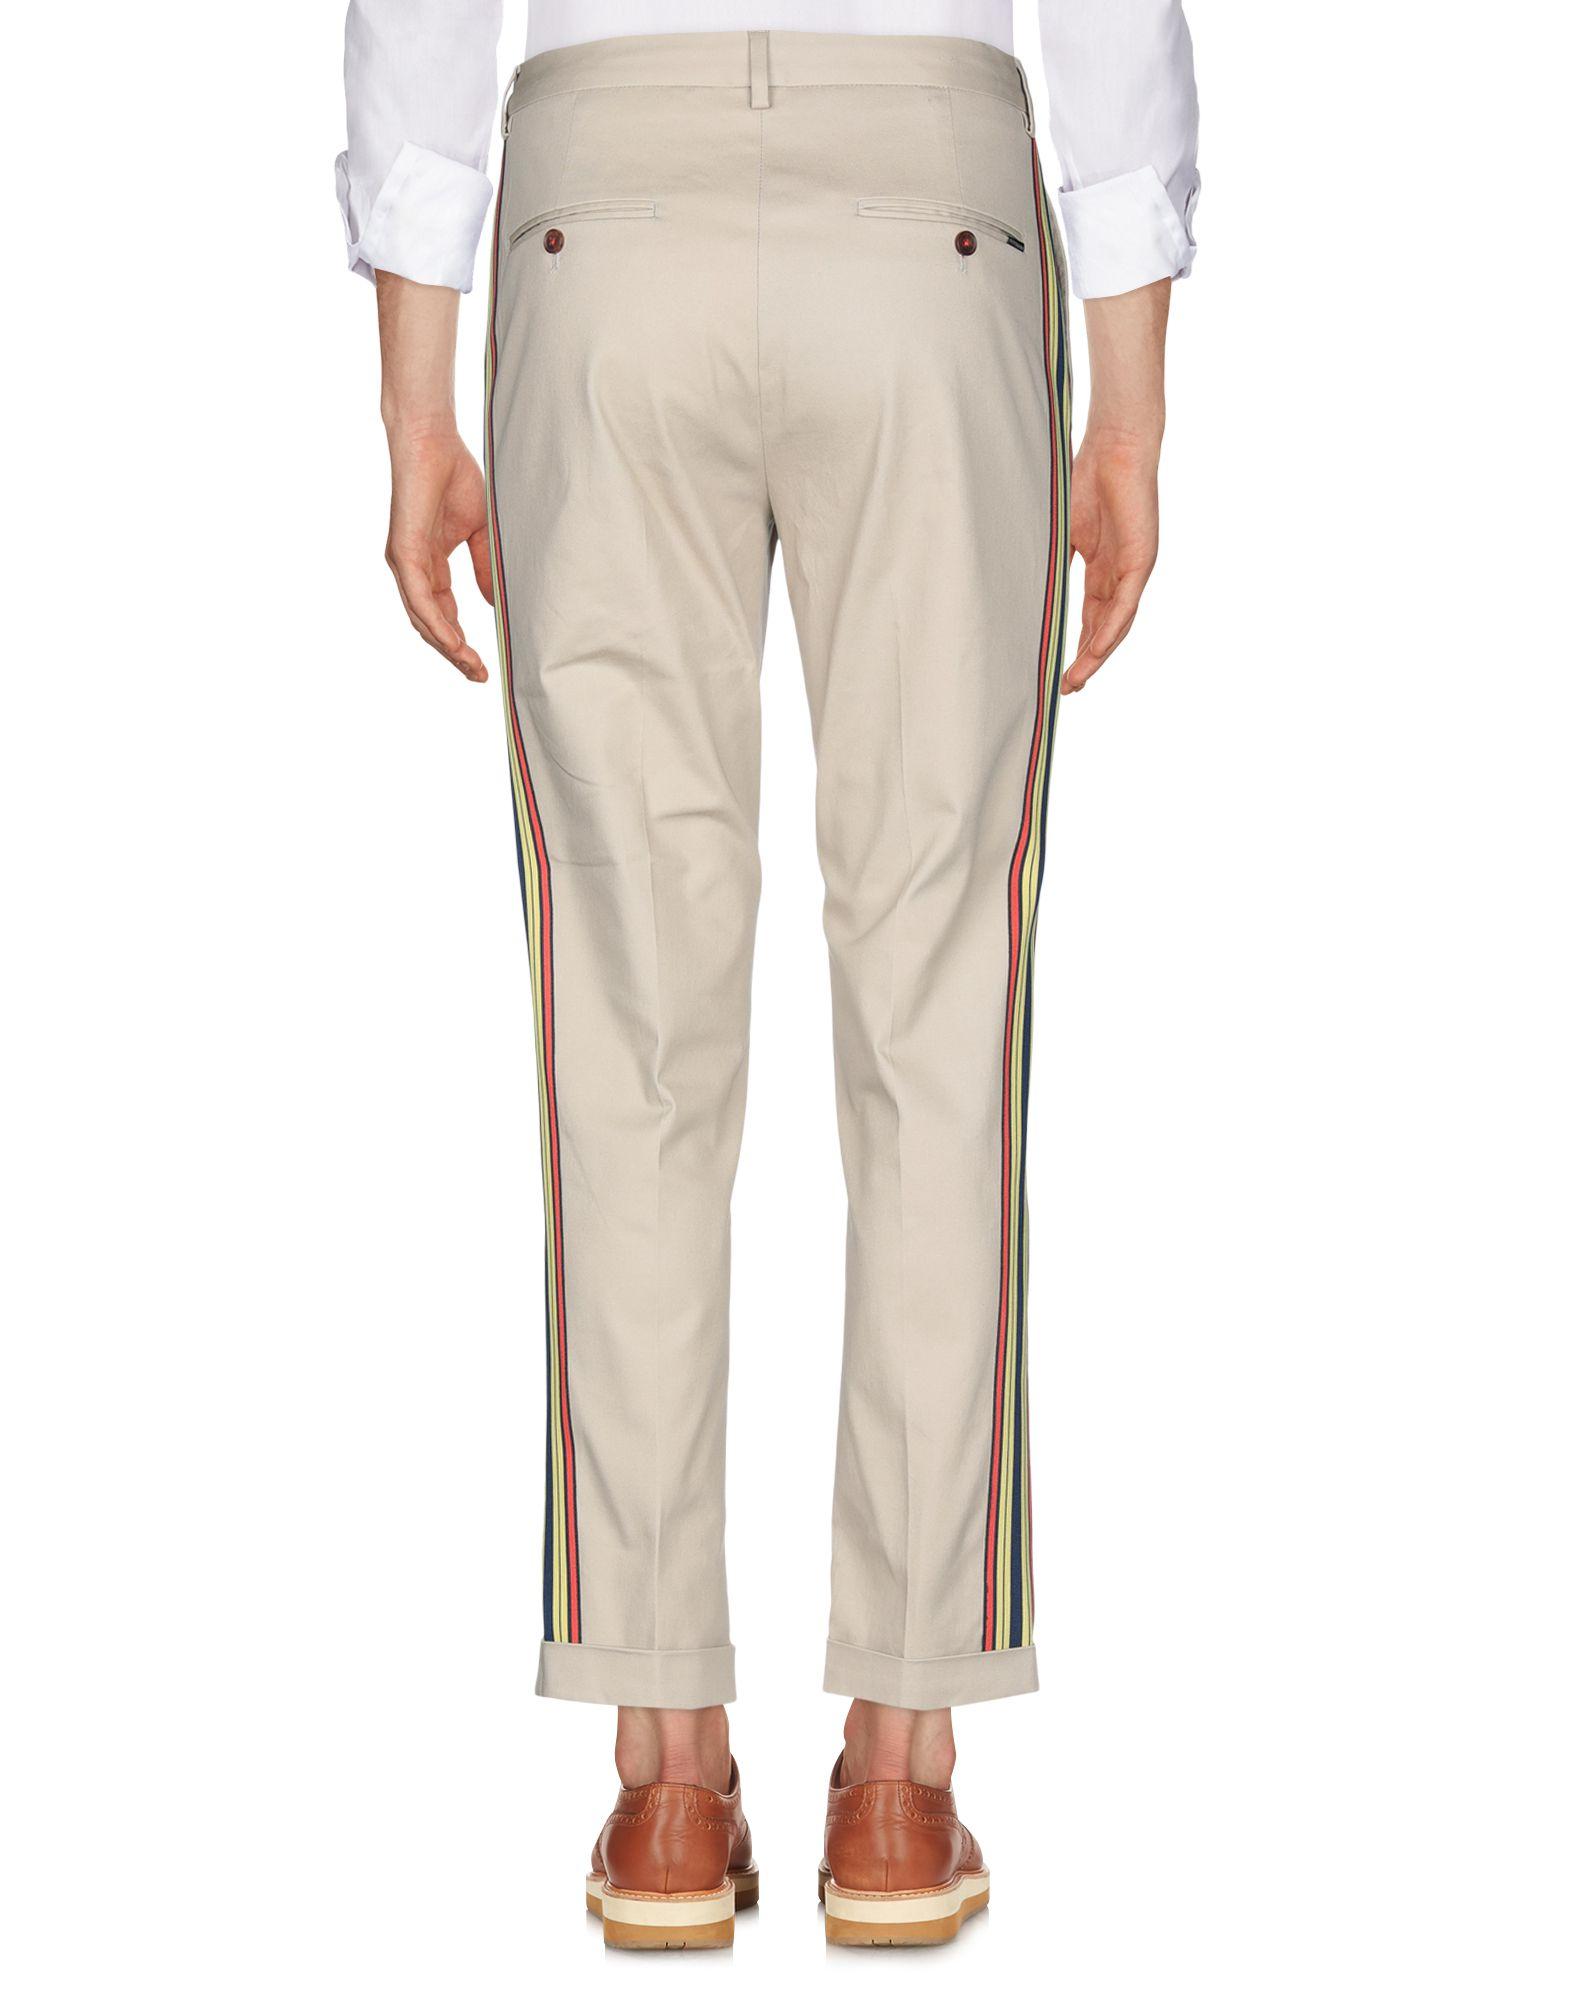 Scotch & Soda Cotton Casual Pants in Beige (Natural) for Men - Lyst